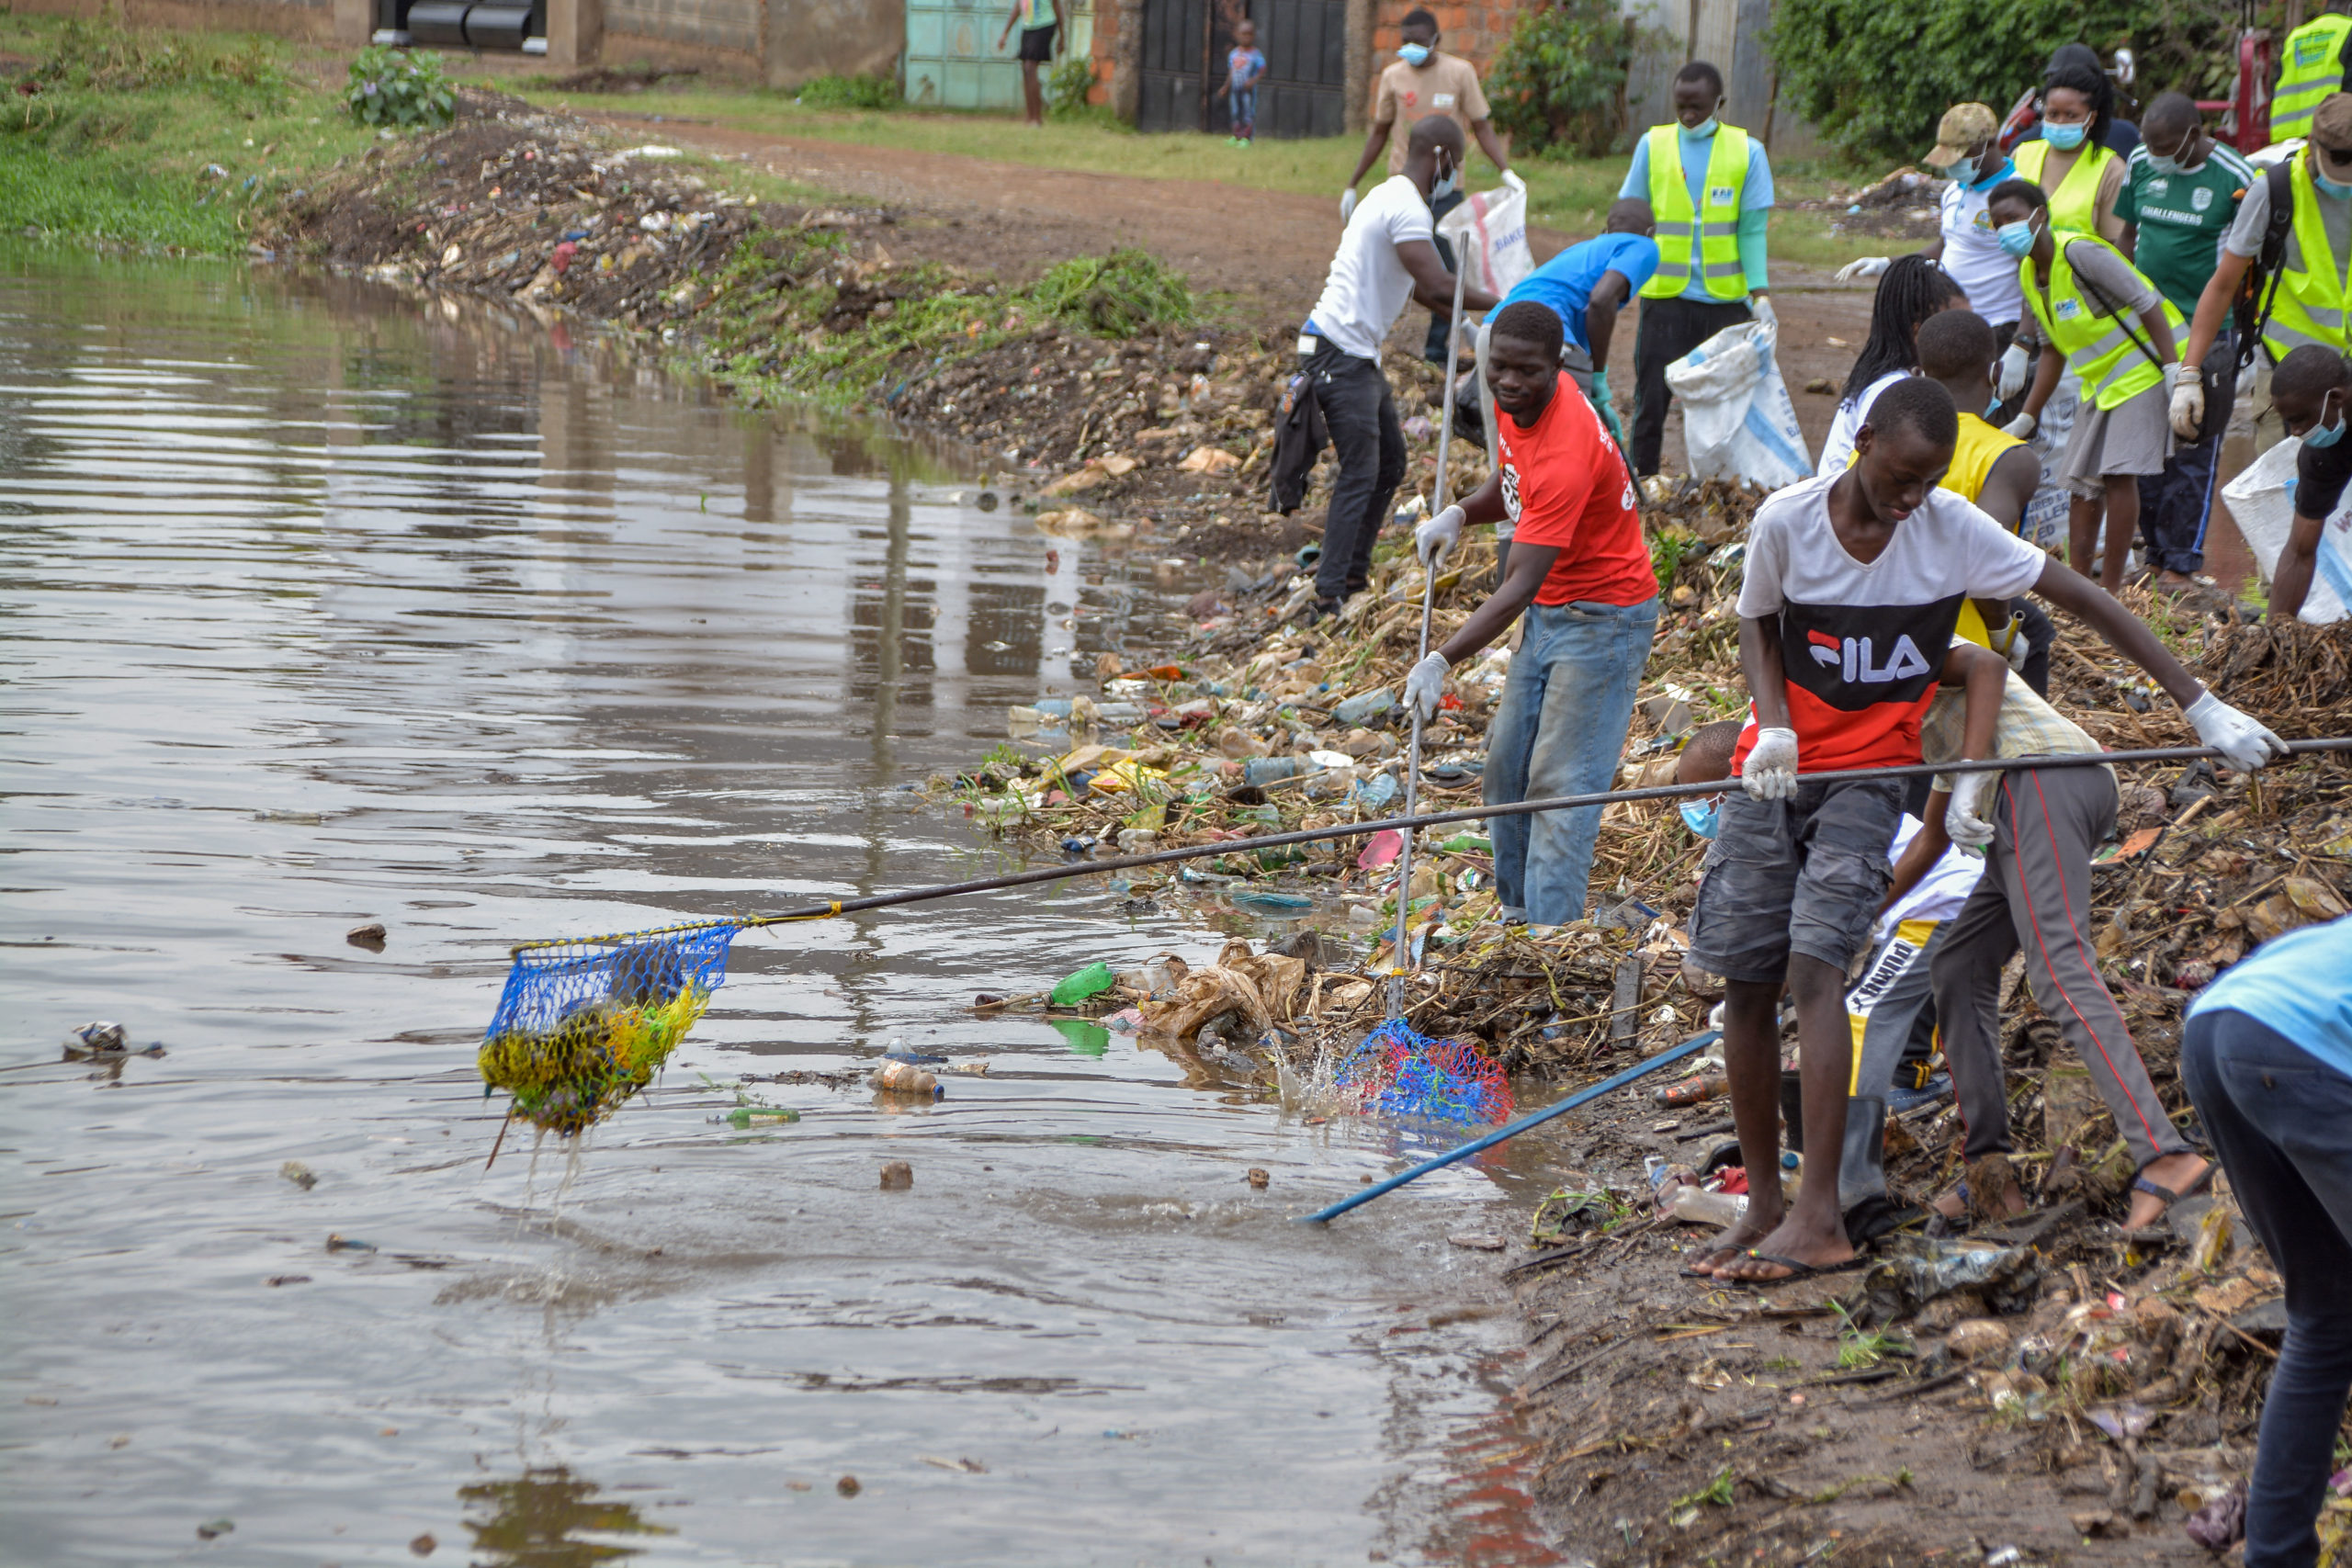 Community volunteers remove plastics with fishing net in Kisumu, Kenya to mark the World Cleanup Day, on Sept. 18. (Brian Ongoro/AFP via Getty Images)